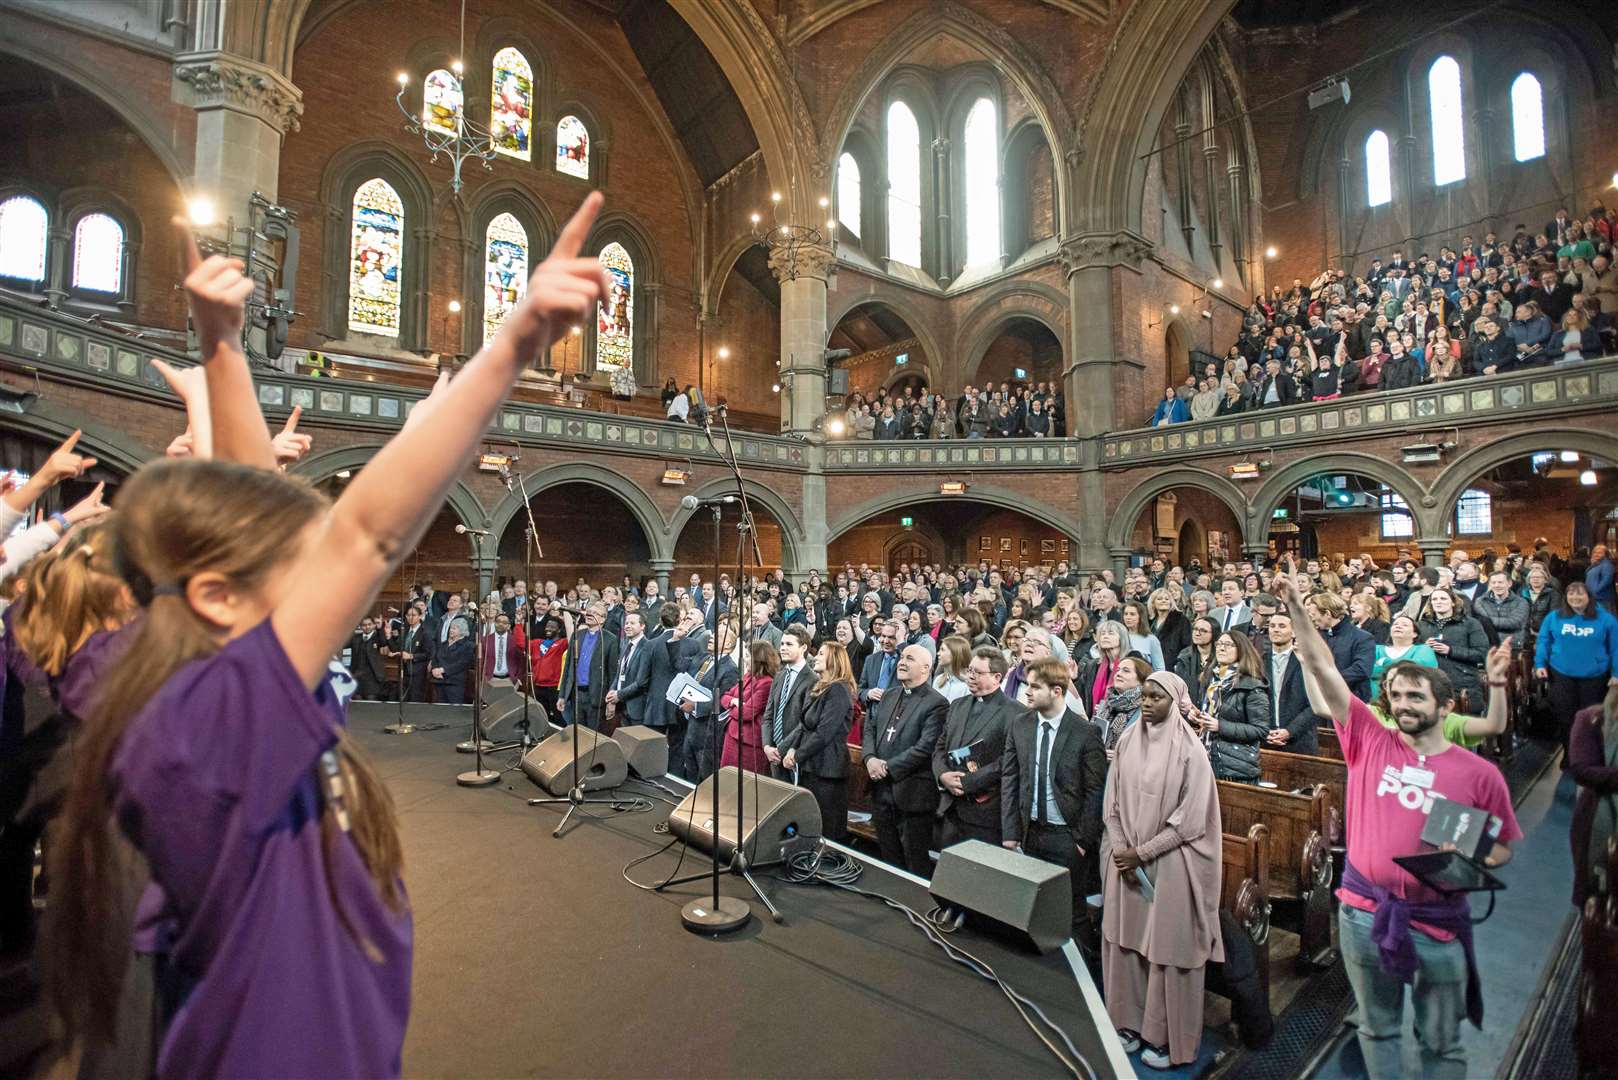 The Church of England held its fifth National Education Conference today in north London. (Max Colson/Church of England)